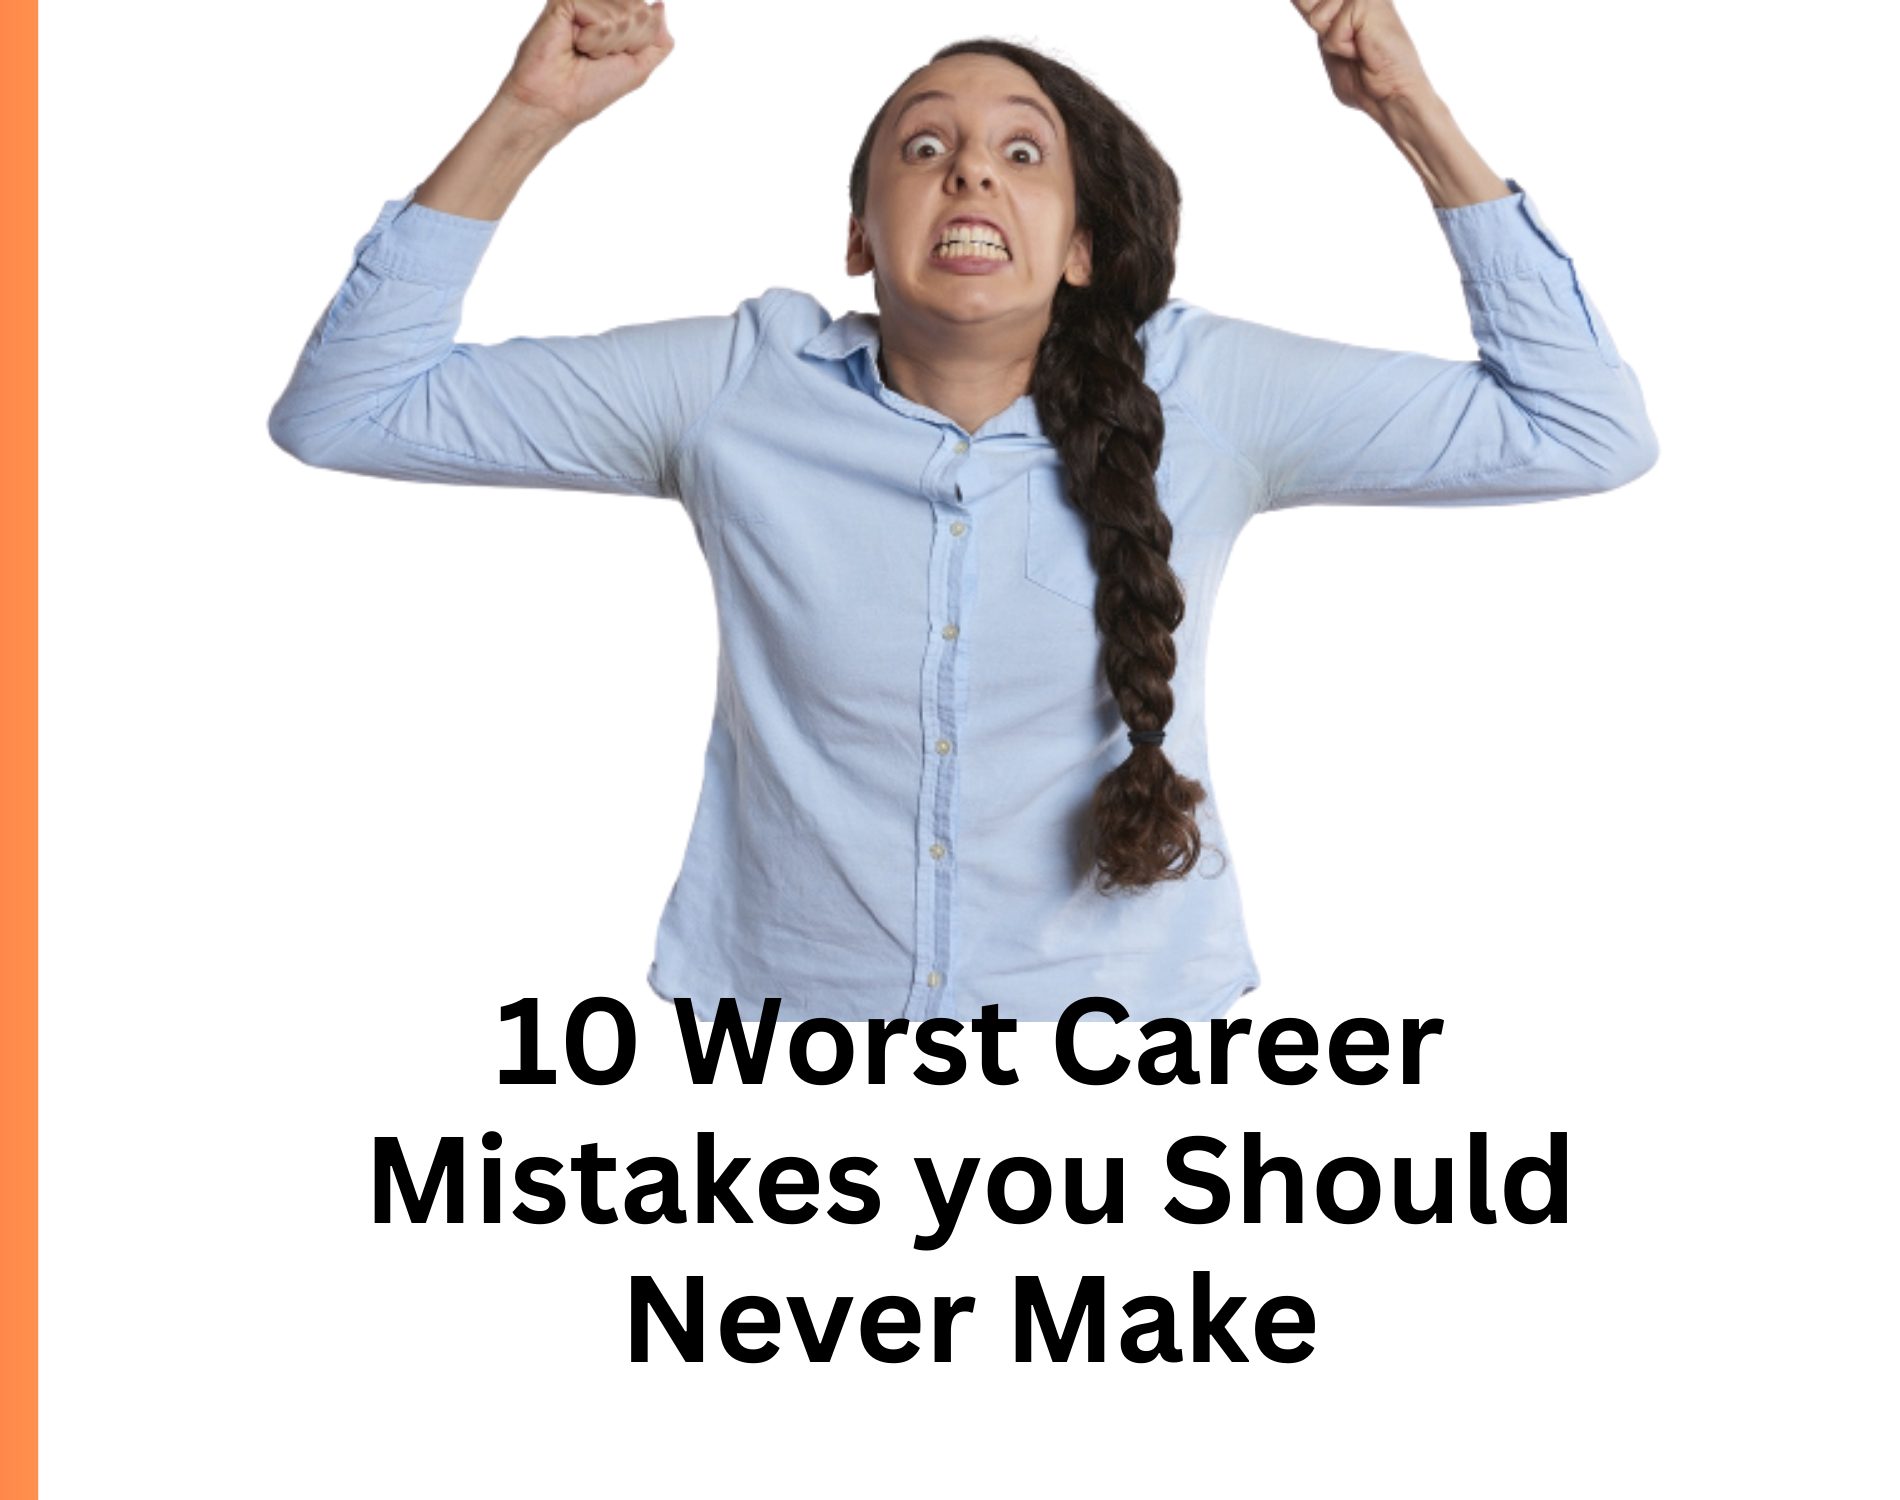 10 Worst Career Mistakes you Should Never Make